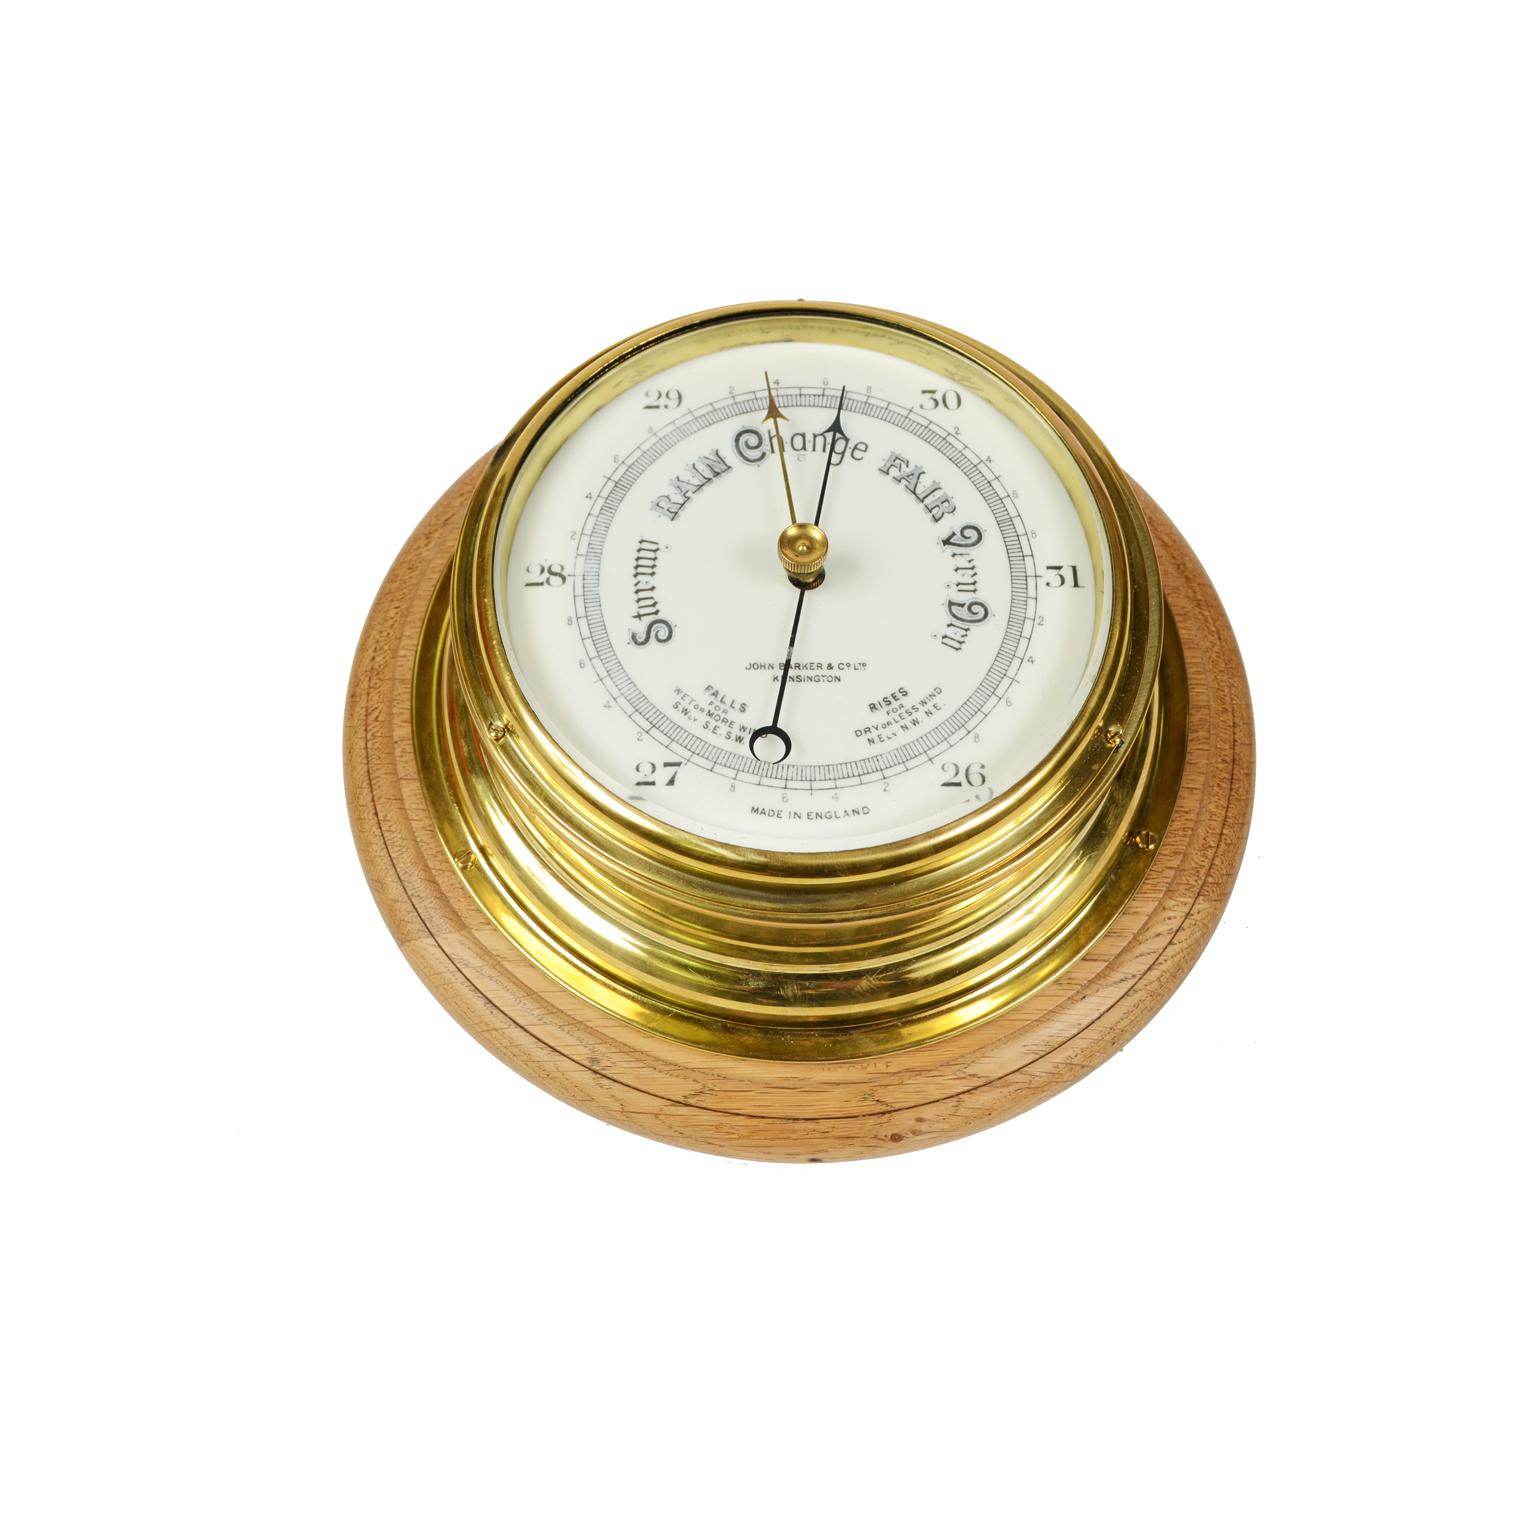 Brass Aneroid Barometer Made by John Barker & Co in the Early 1900